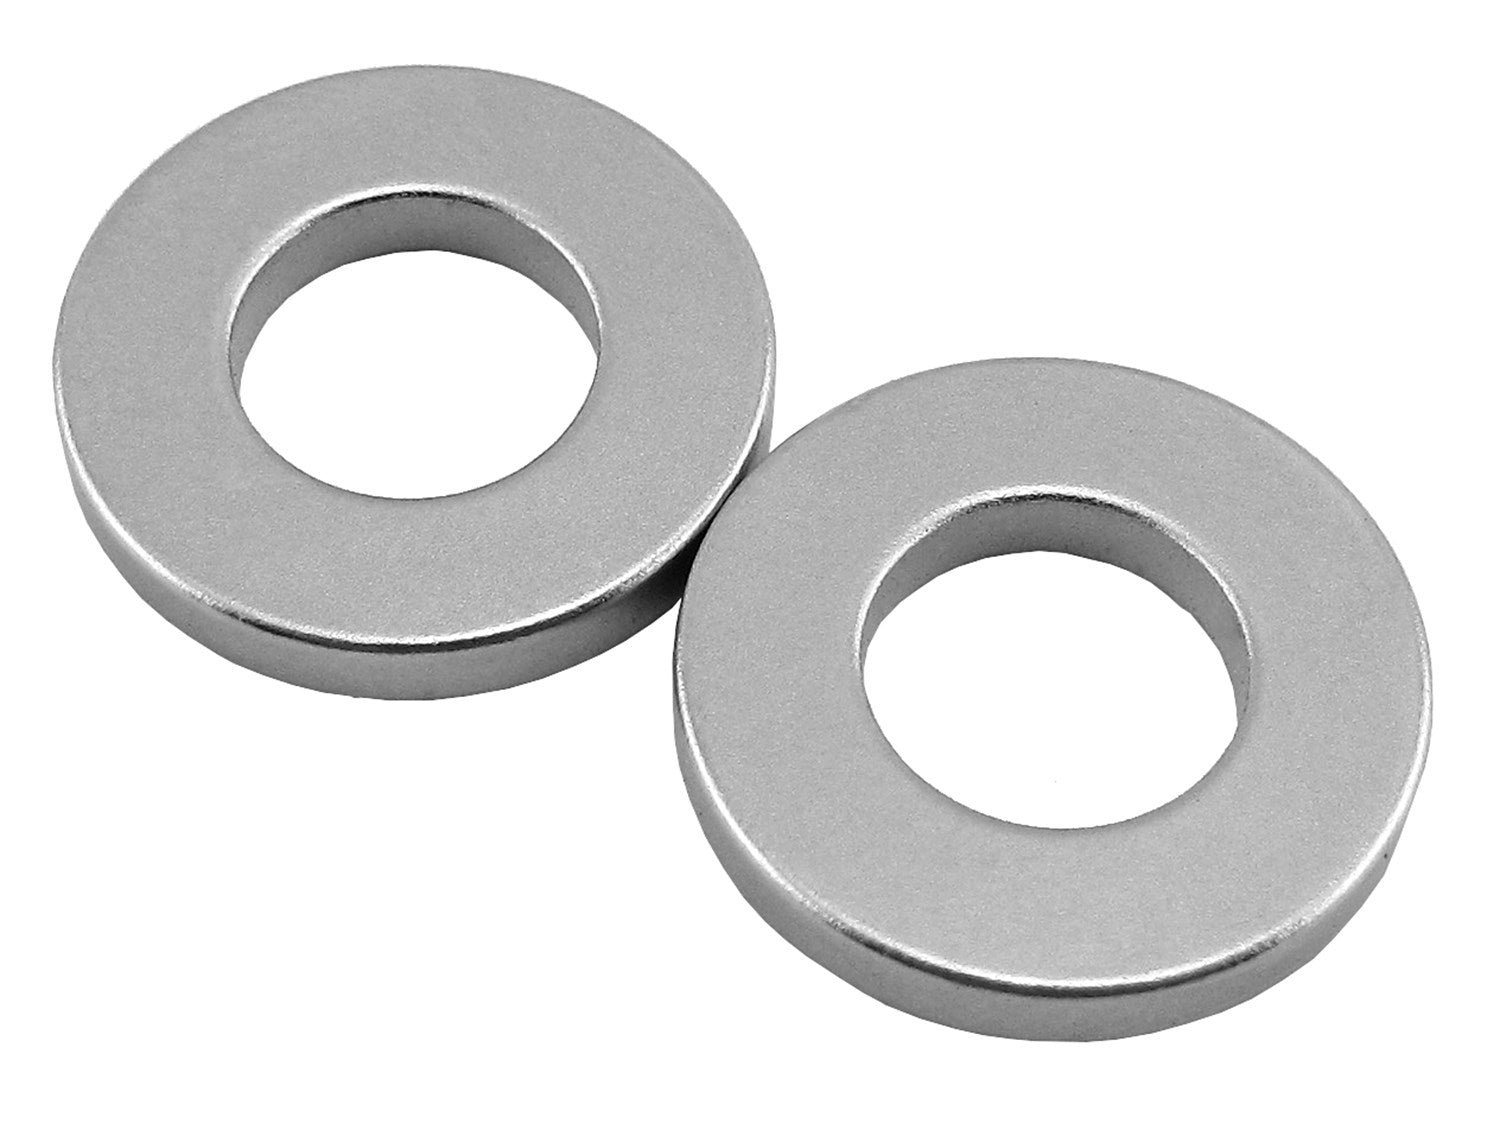 MASTER MAGNETICS INC, Source d'aimant .105 in. L X .74 in. W Silver Ring Magnet Rings 5 lb. pull 3 pc